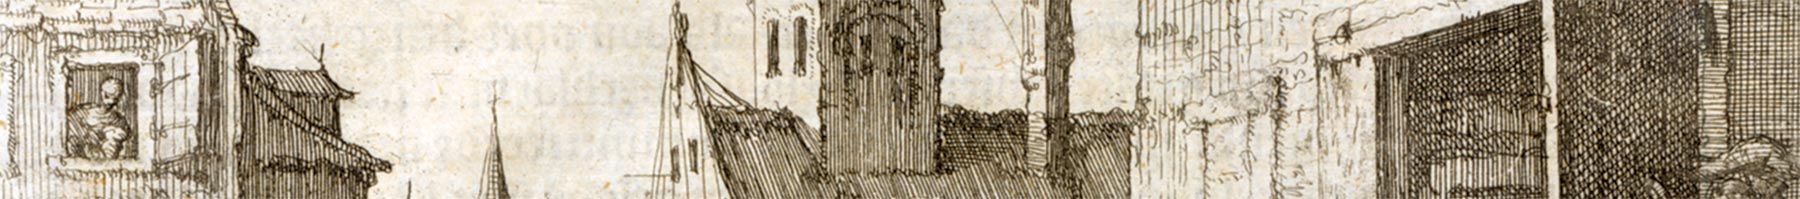 engraving of city rooftops